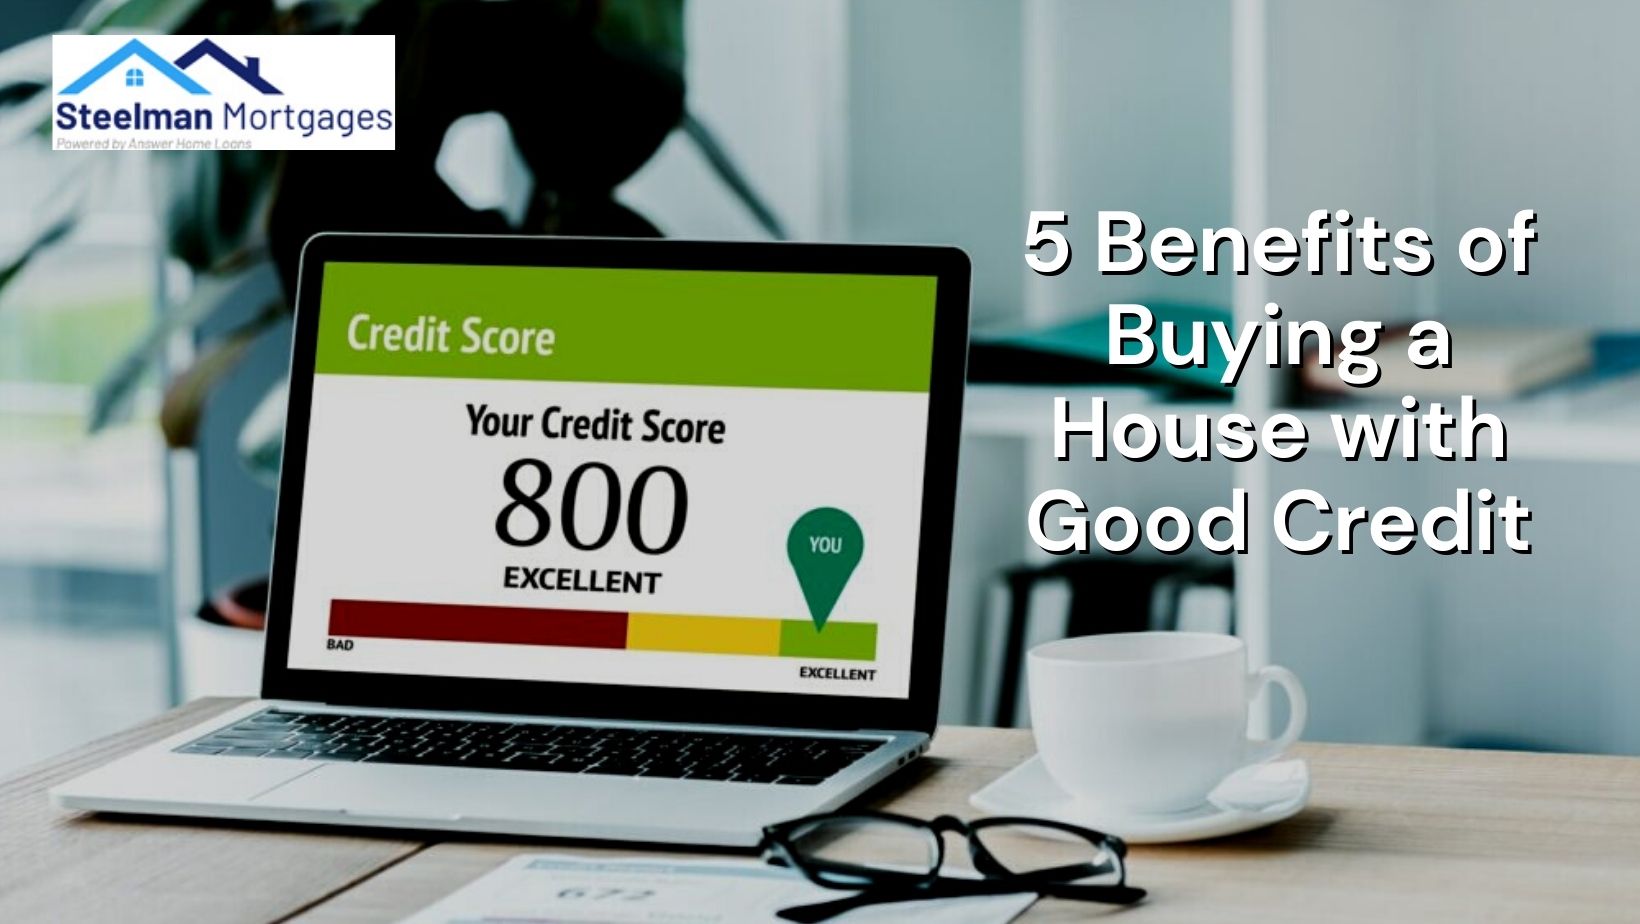 5 Benefits of Buying a House with Good Credit